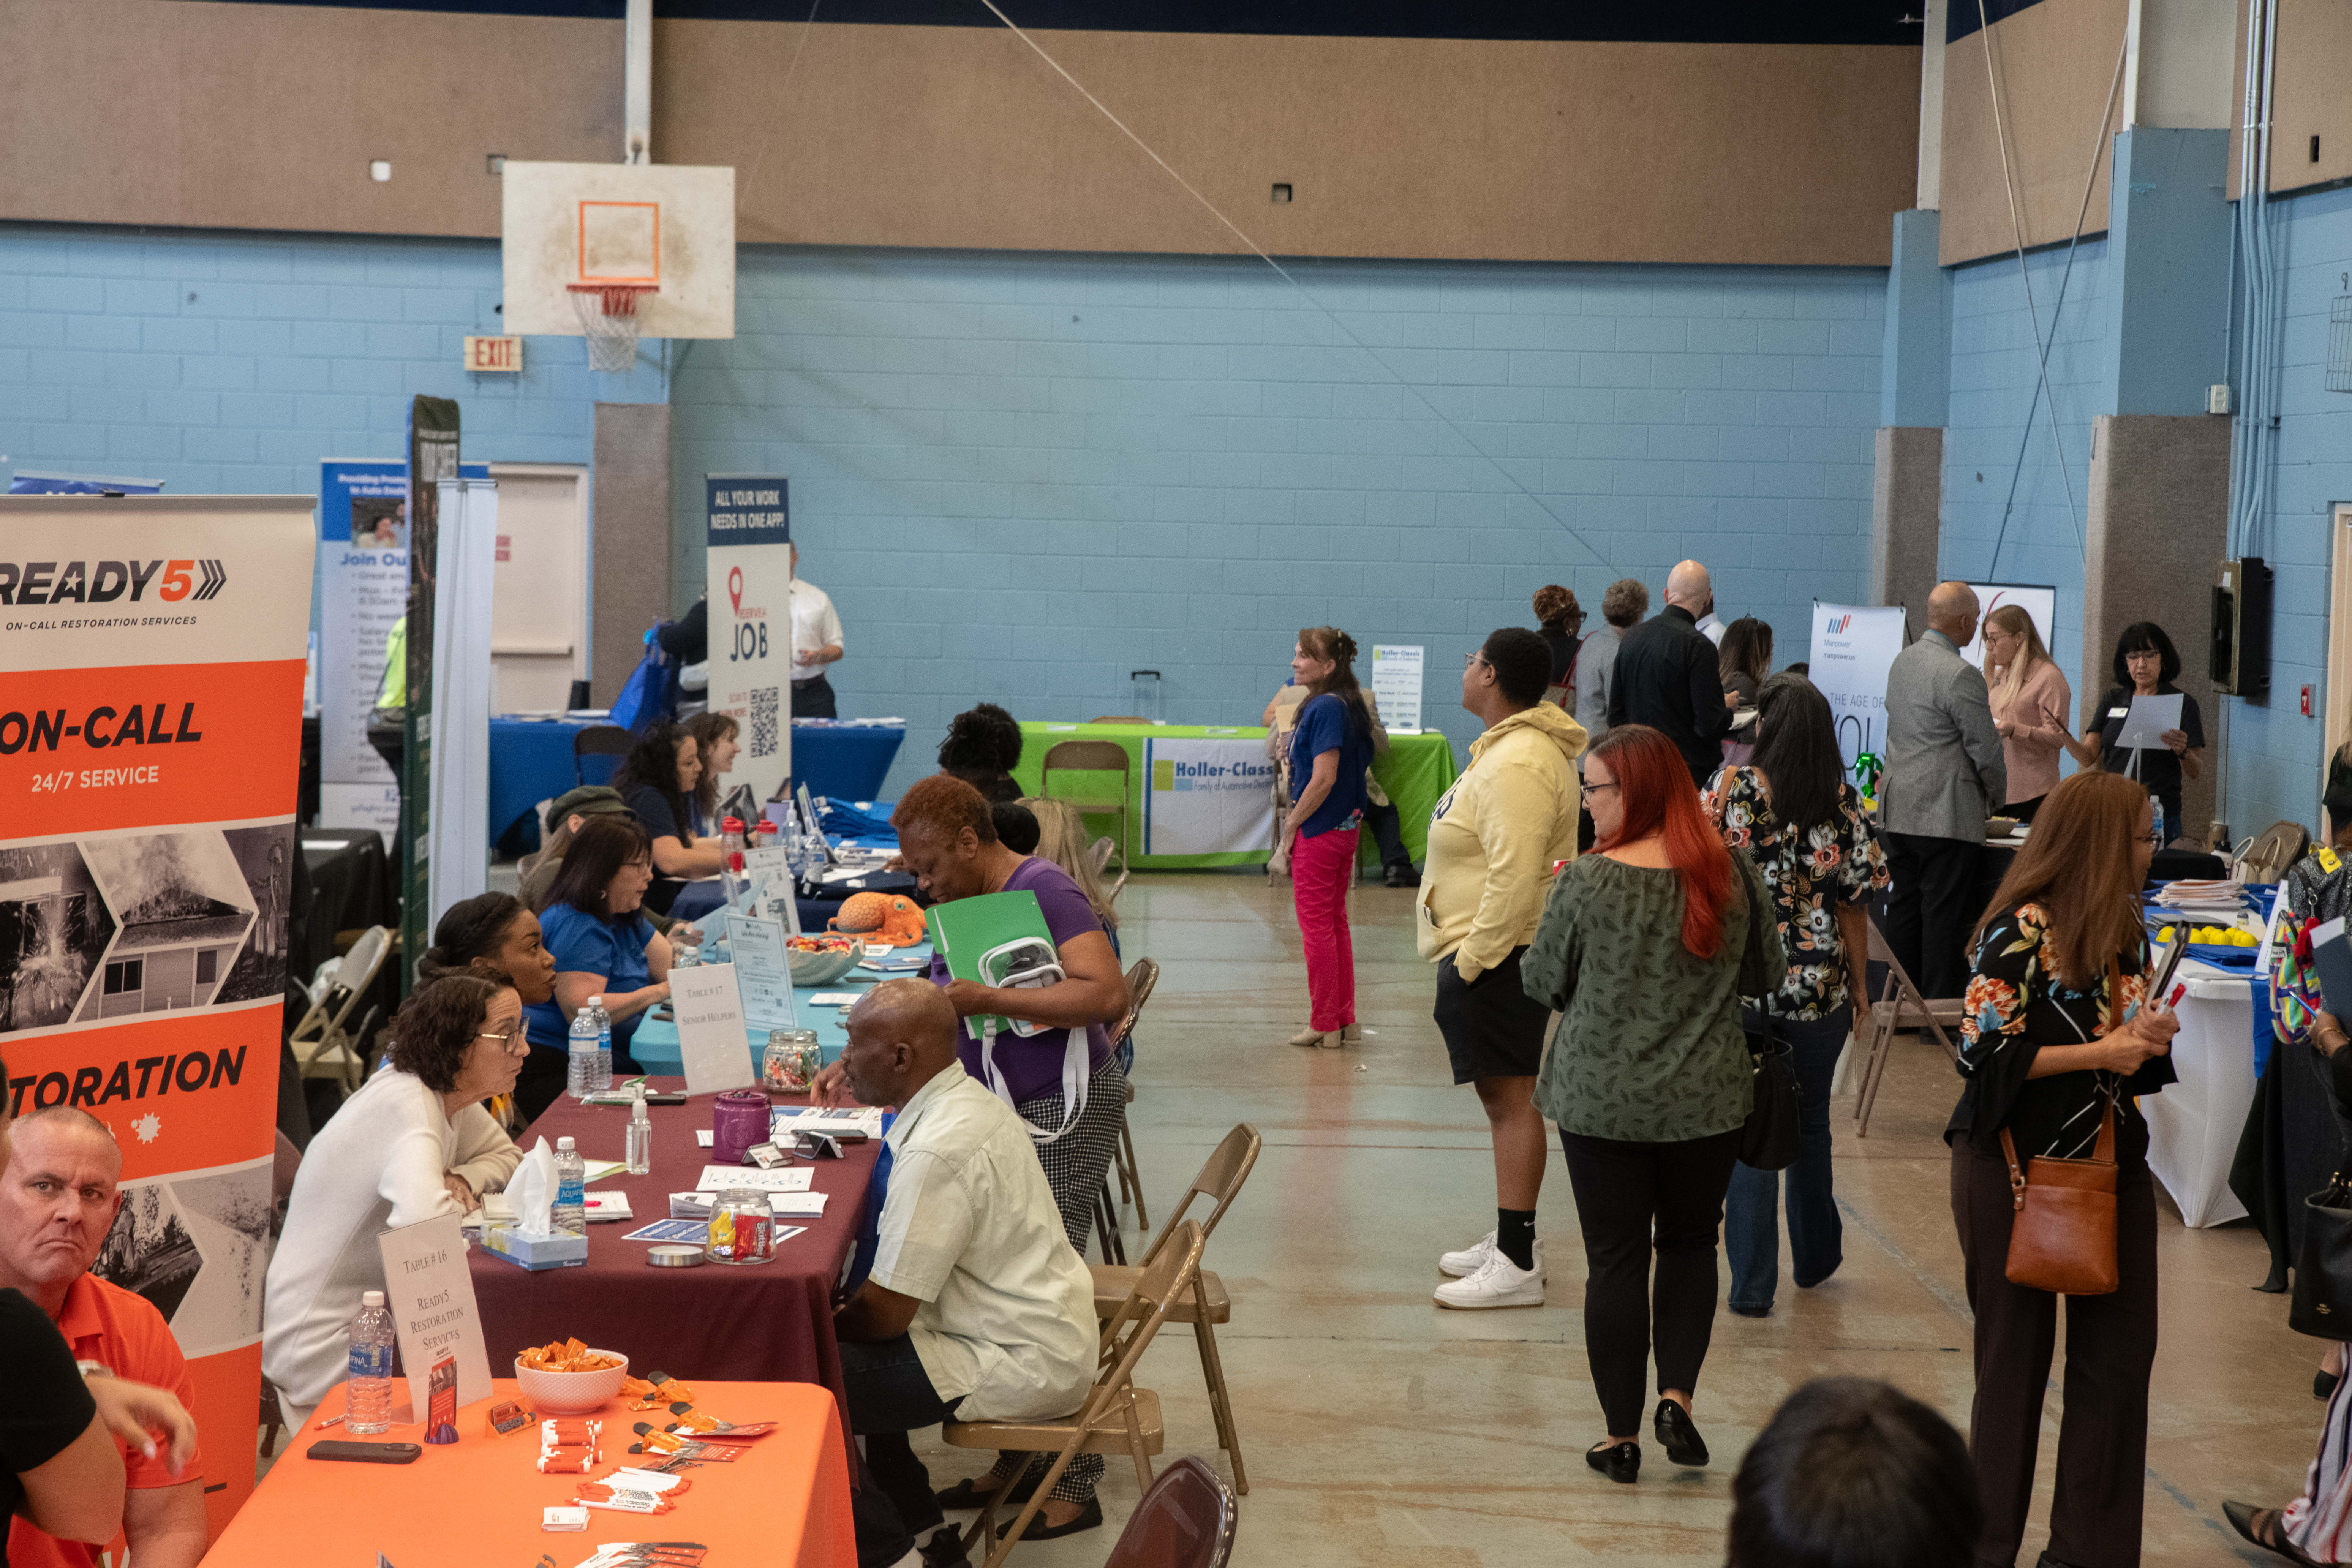 A busy job fair taking place in a gym